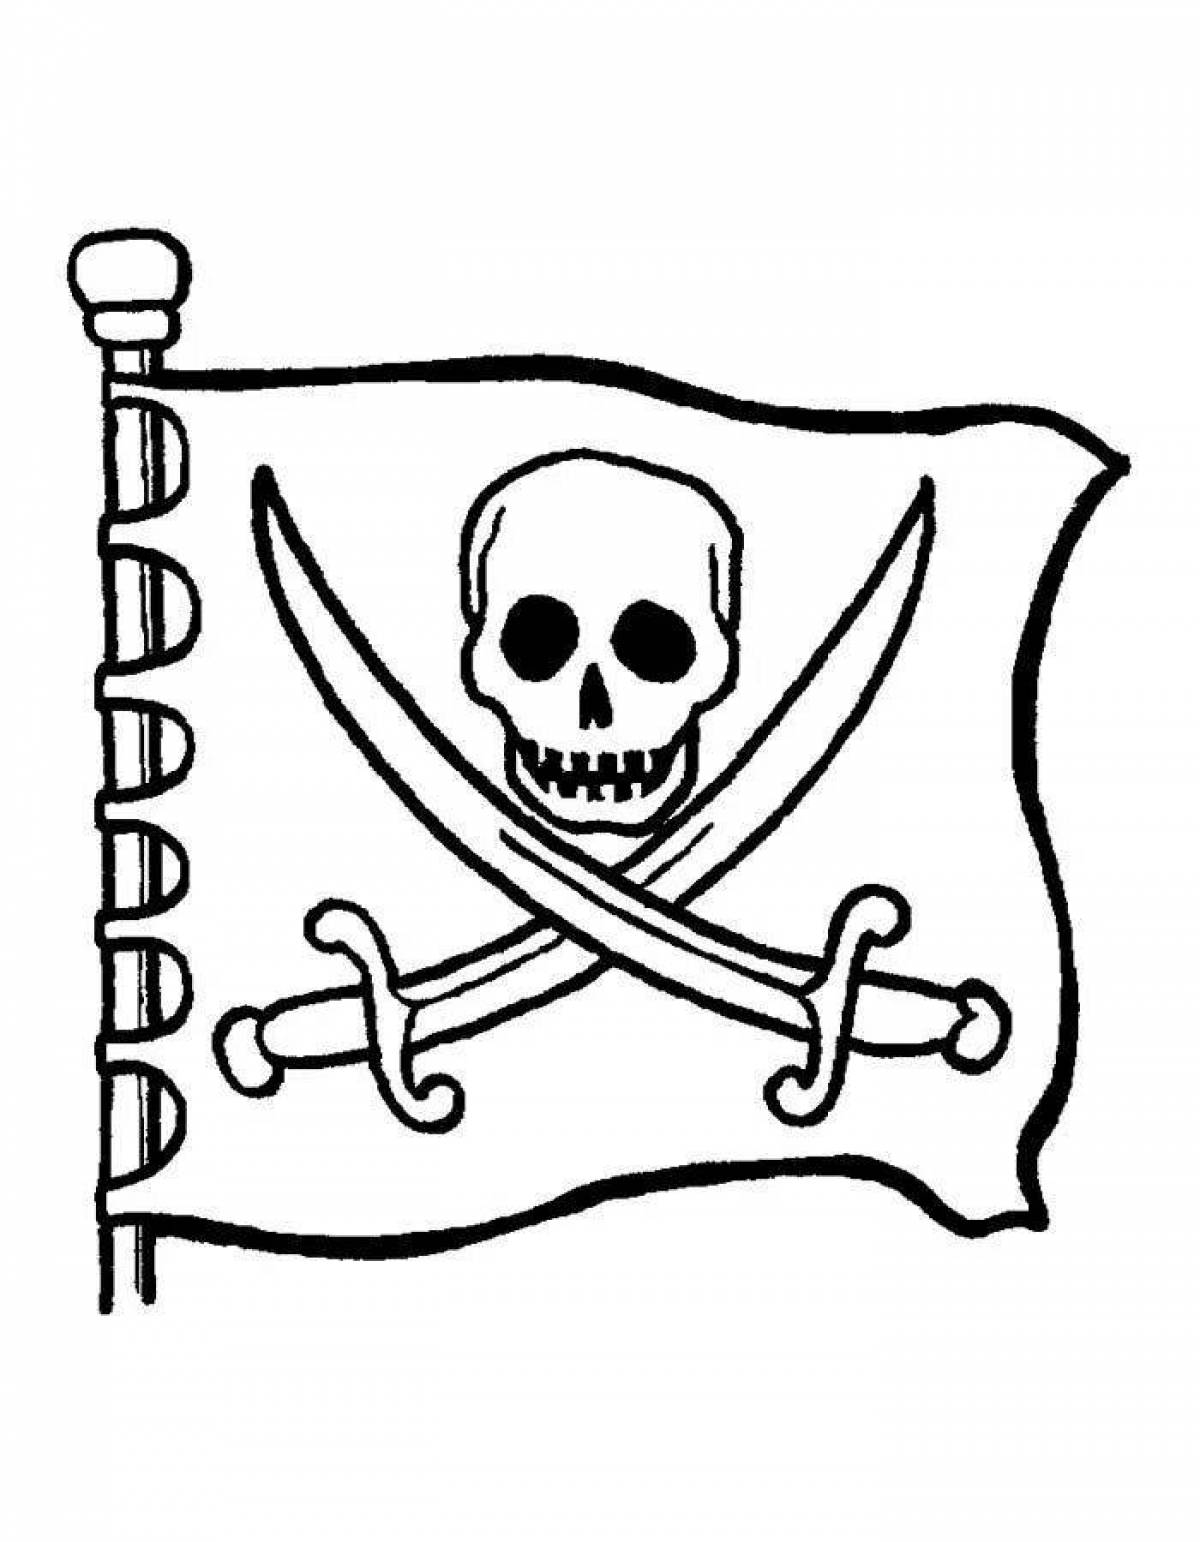 Coloring jolly roger - greatness